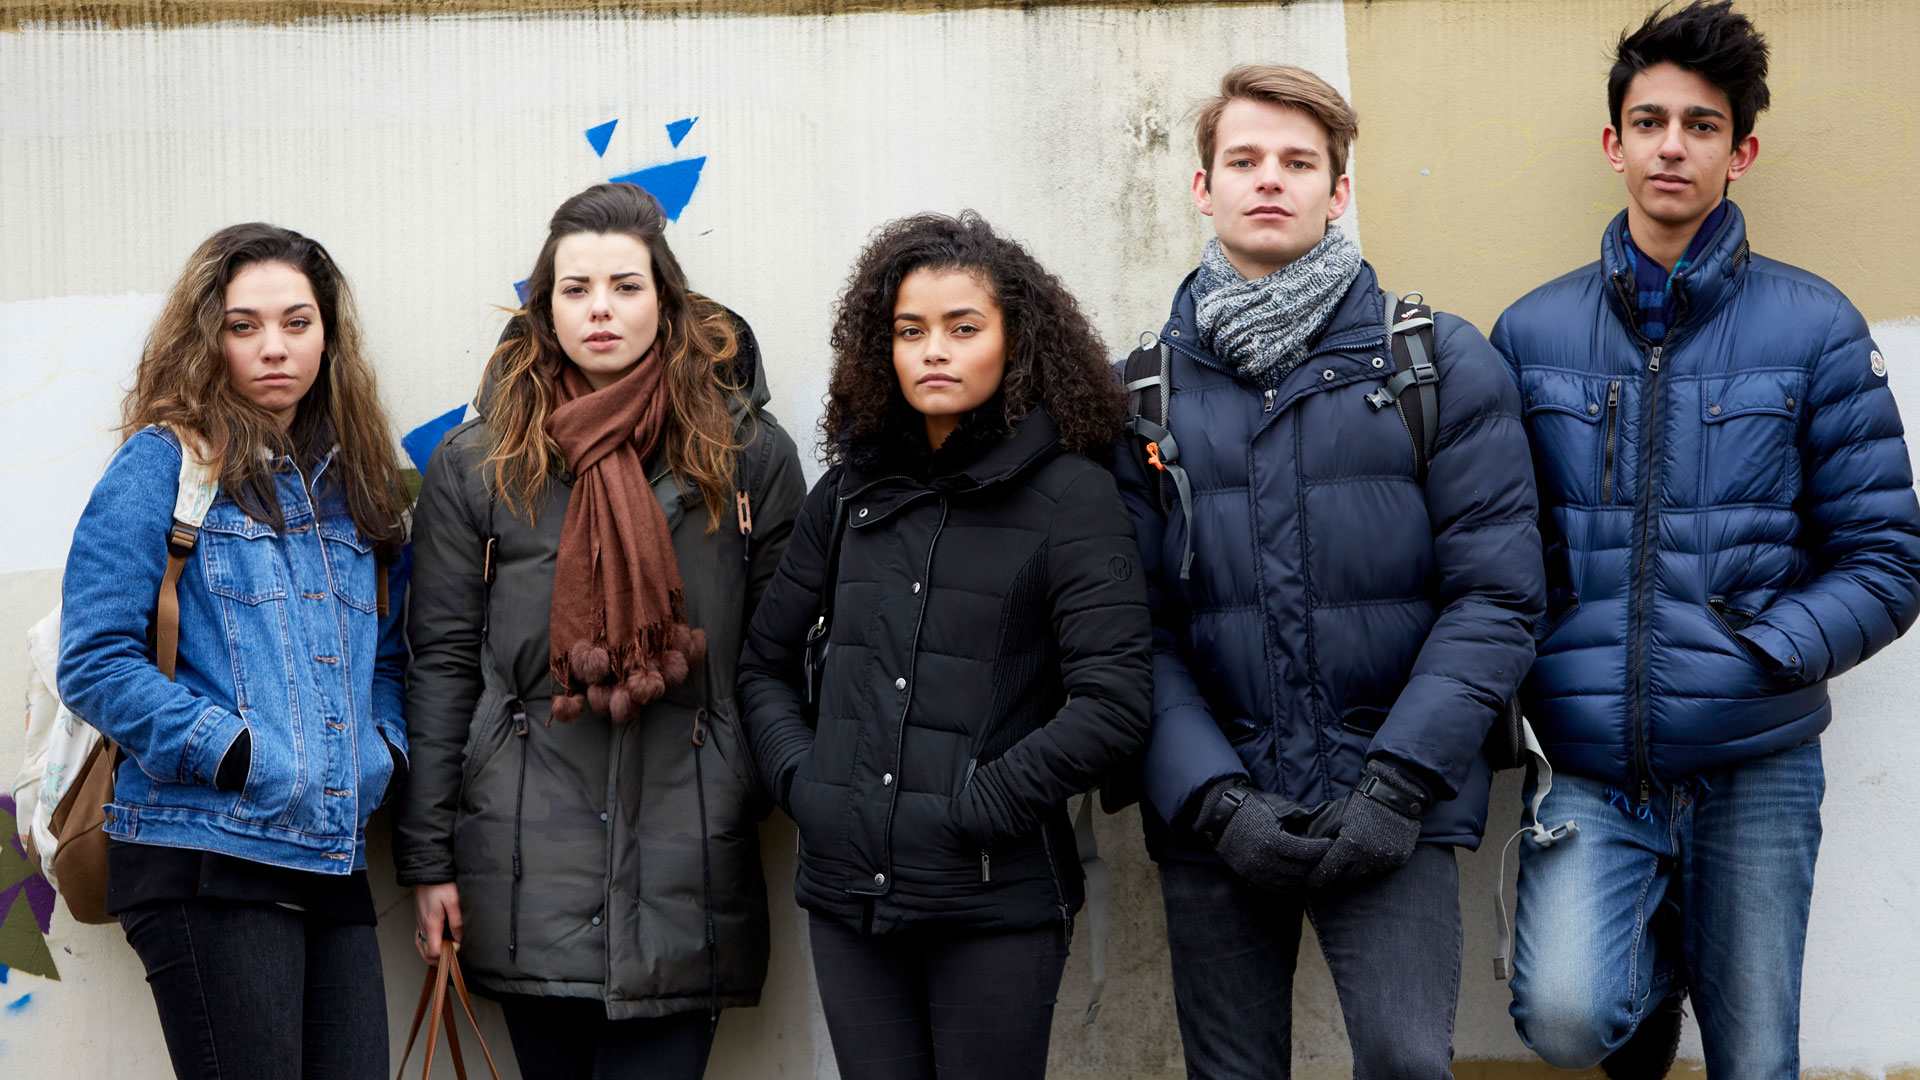 Group of five young people wearing jackets standing against the wall looking in front of the camera.